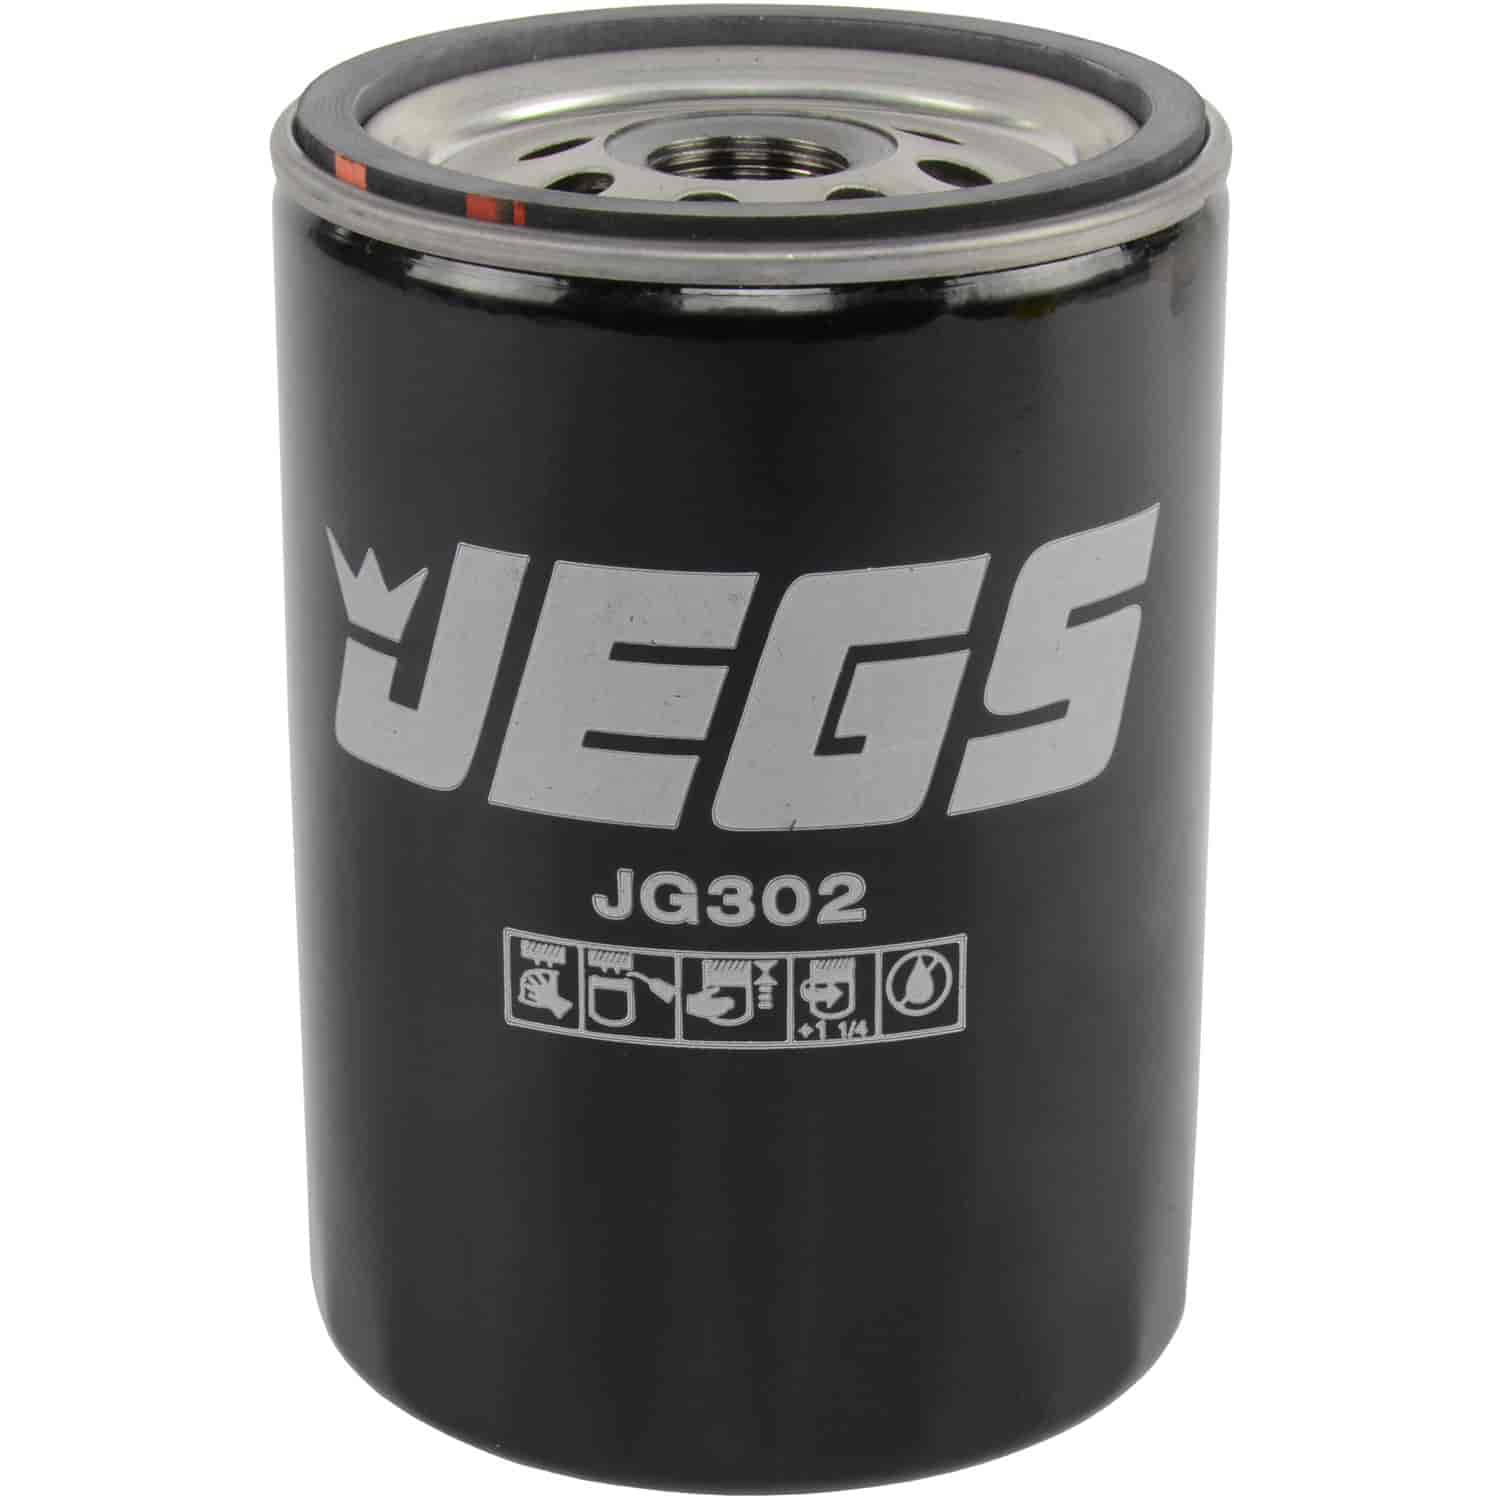 Performance GM Oil Filter, 5.35 in. High, 13/16 in.-16 UNF Thread